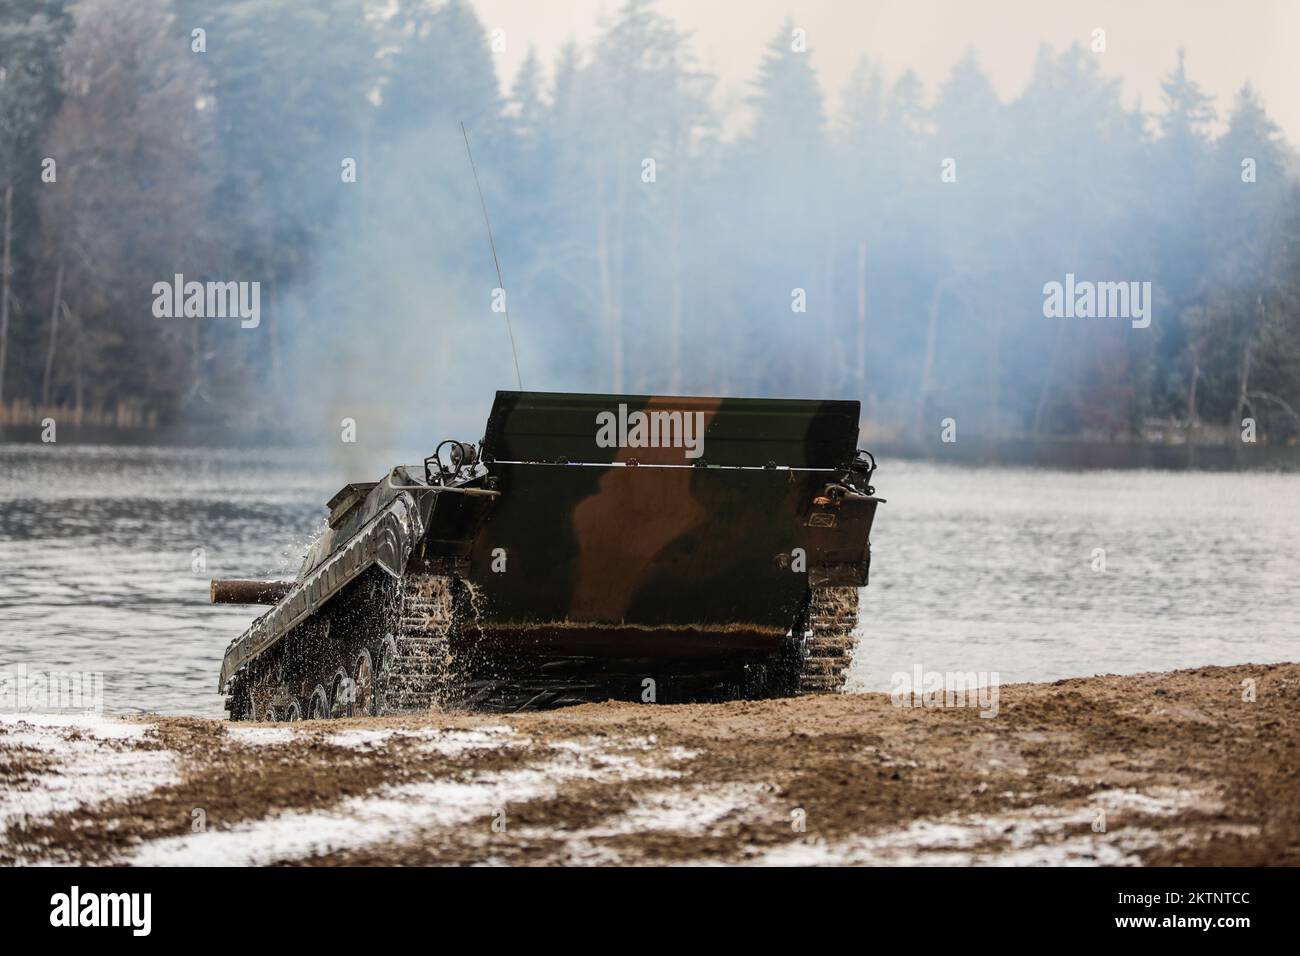 Polish soldiers assigned to 20th Mechanized Brigade operating a BMP-1 conduct amphibious assault operations during the Bull Run training exercise at Bemowo Piskie, Poland, Nov. 25, 2022. The 20th Mechanized Brigade is proudly working alongside the 1st Infantry Division, NATO allies and regional security partners to provide combat-credible forces to V Corps, under America's forward deployed corps in Europe. (U.S. Army National Guard photo by Sgt. Gavin K. Ching) Stock Photo